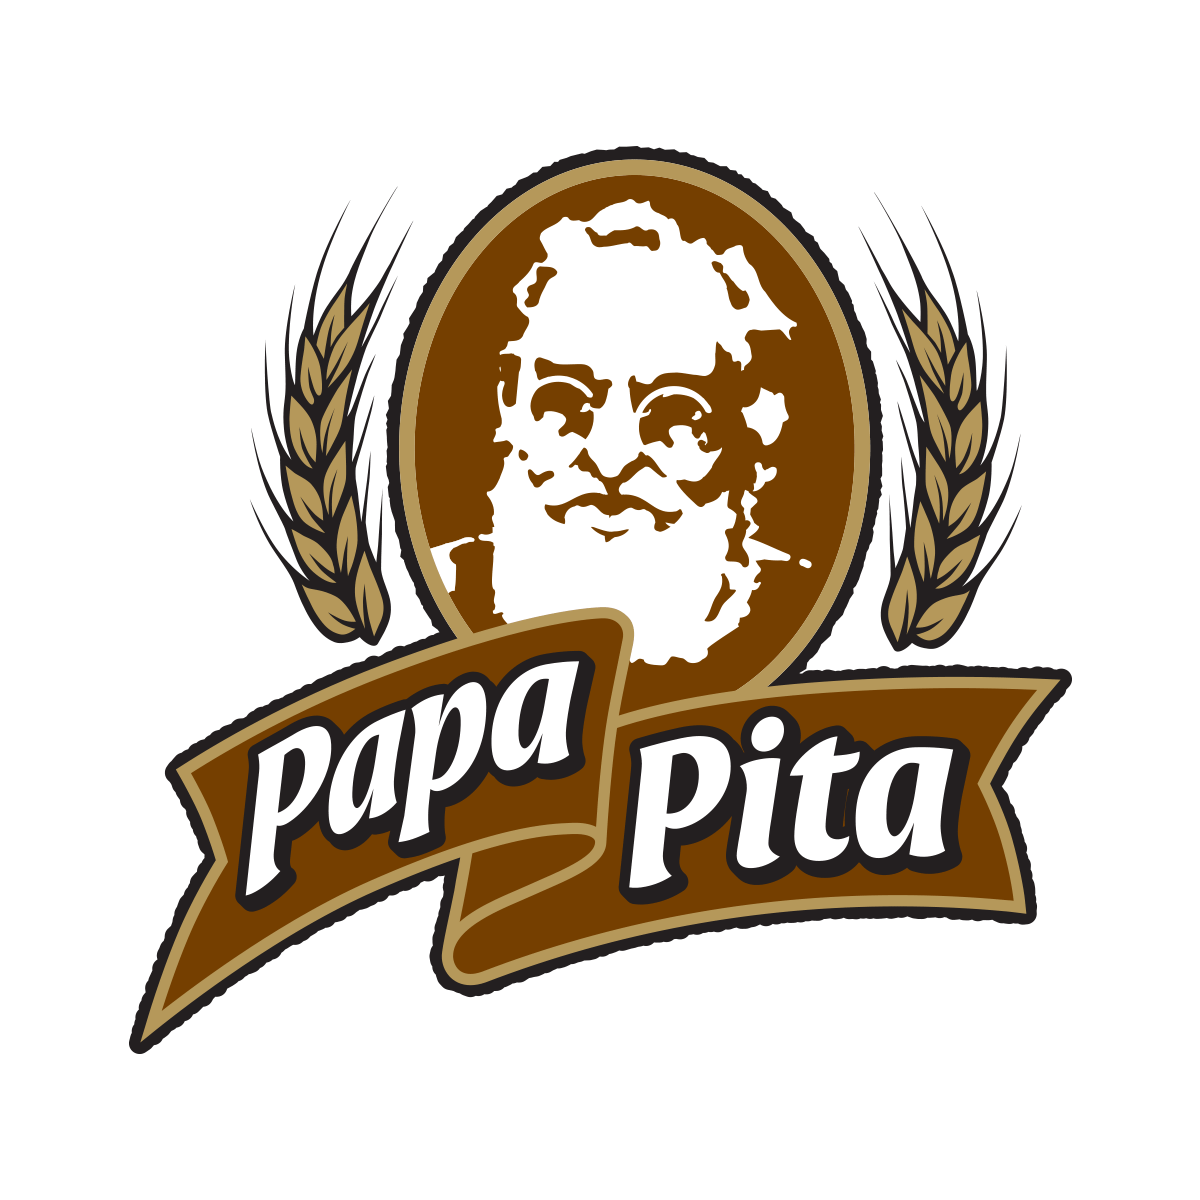 Pita Logo - Papa Pita - Pitas, bagels, and breads perfected for over 30 years!